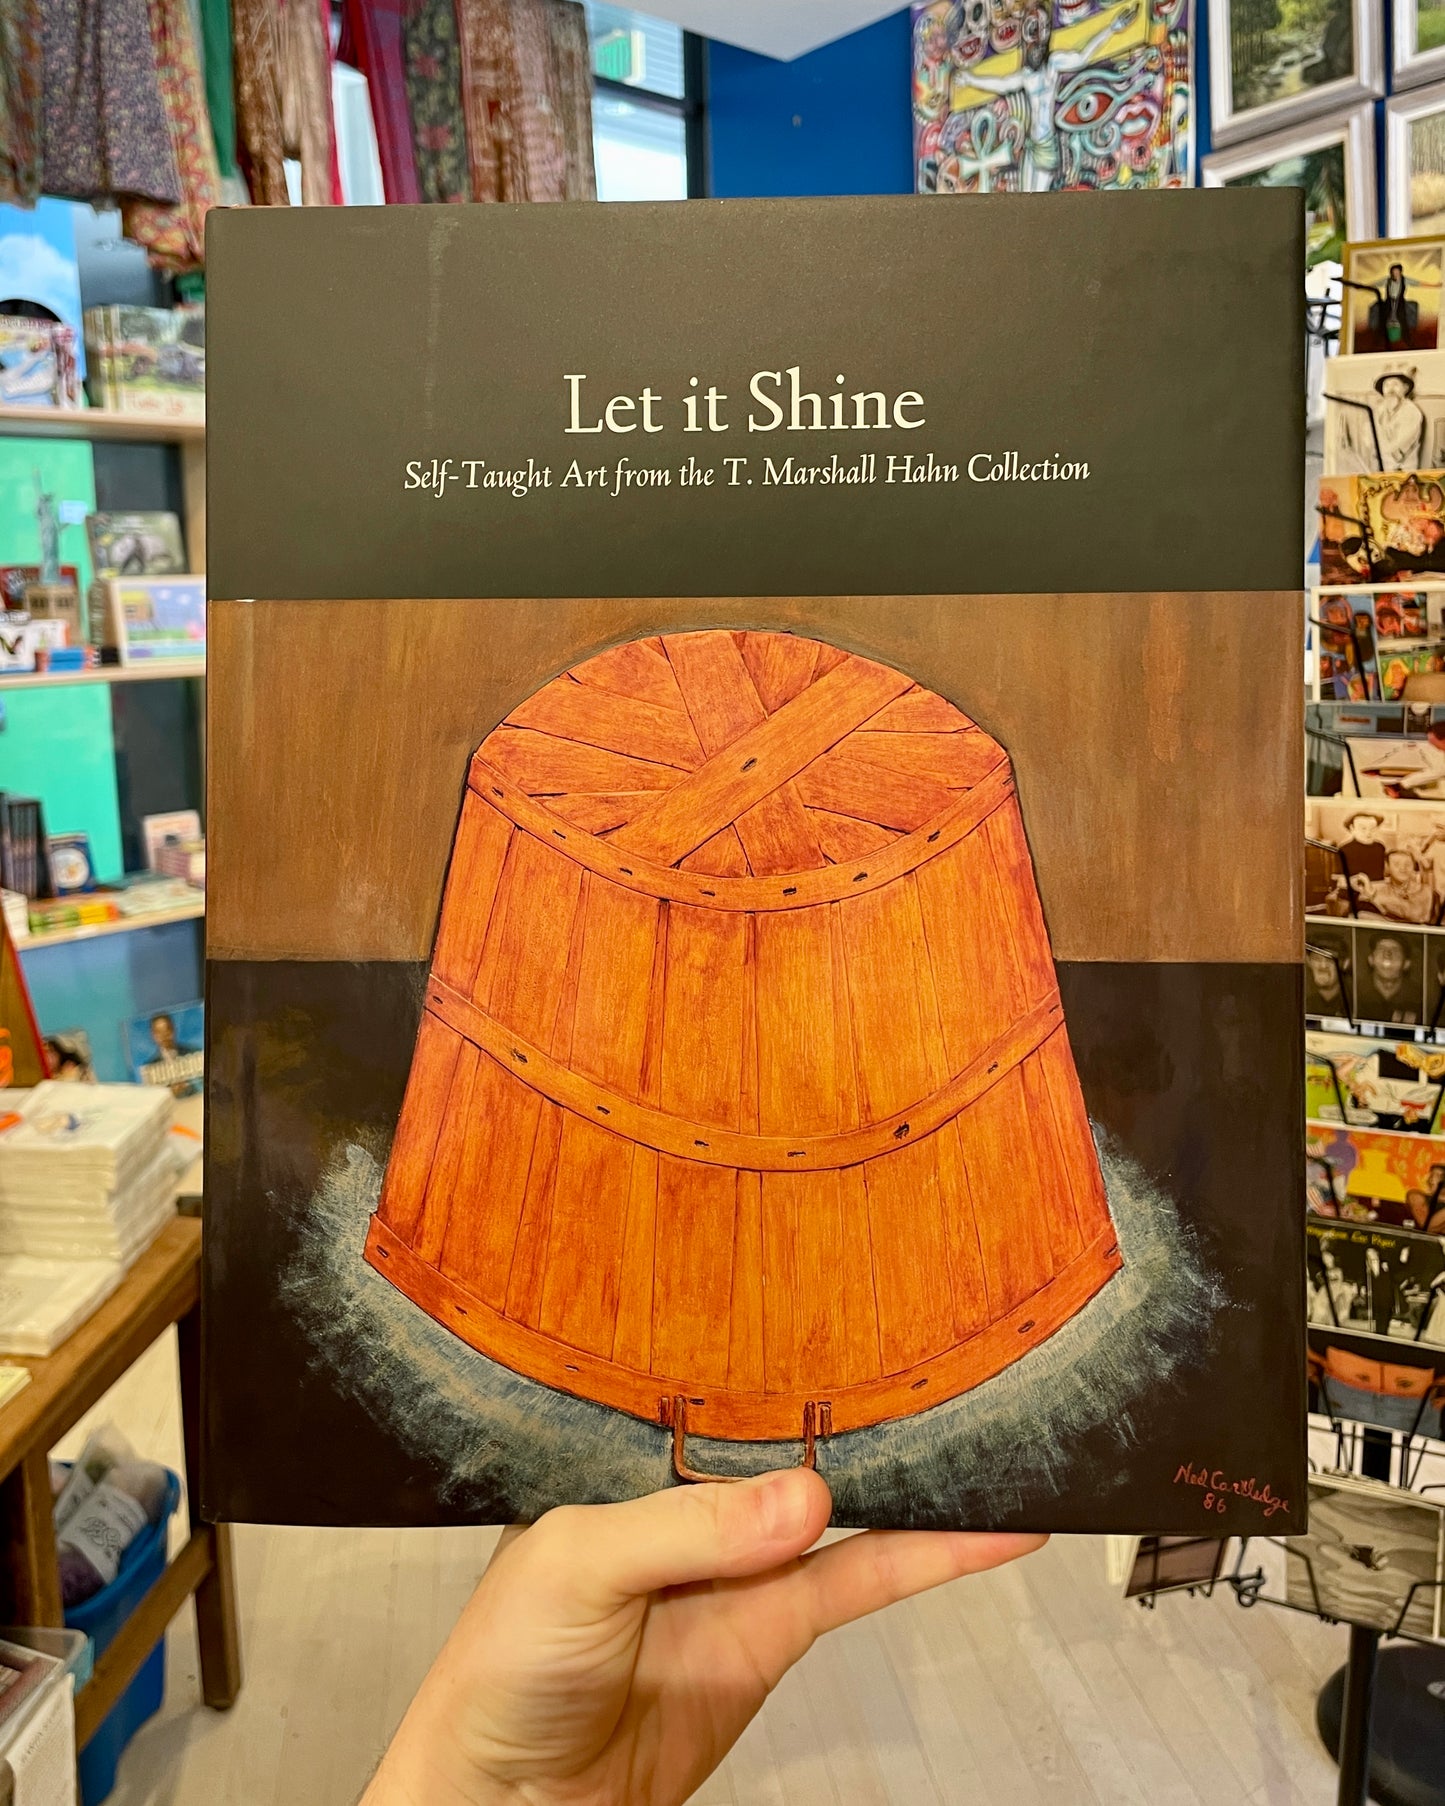 "Let it Shine: Self-Taught Art from the T. Marshall Hahn Collection" by the High Museum of Art hardcover book